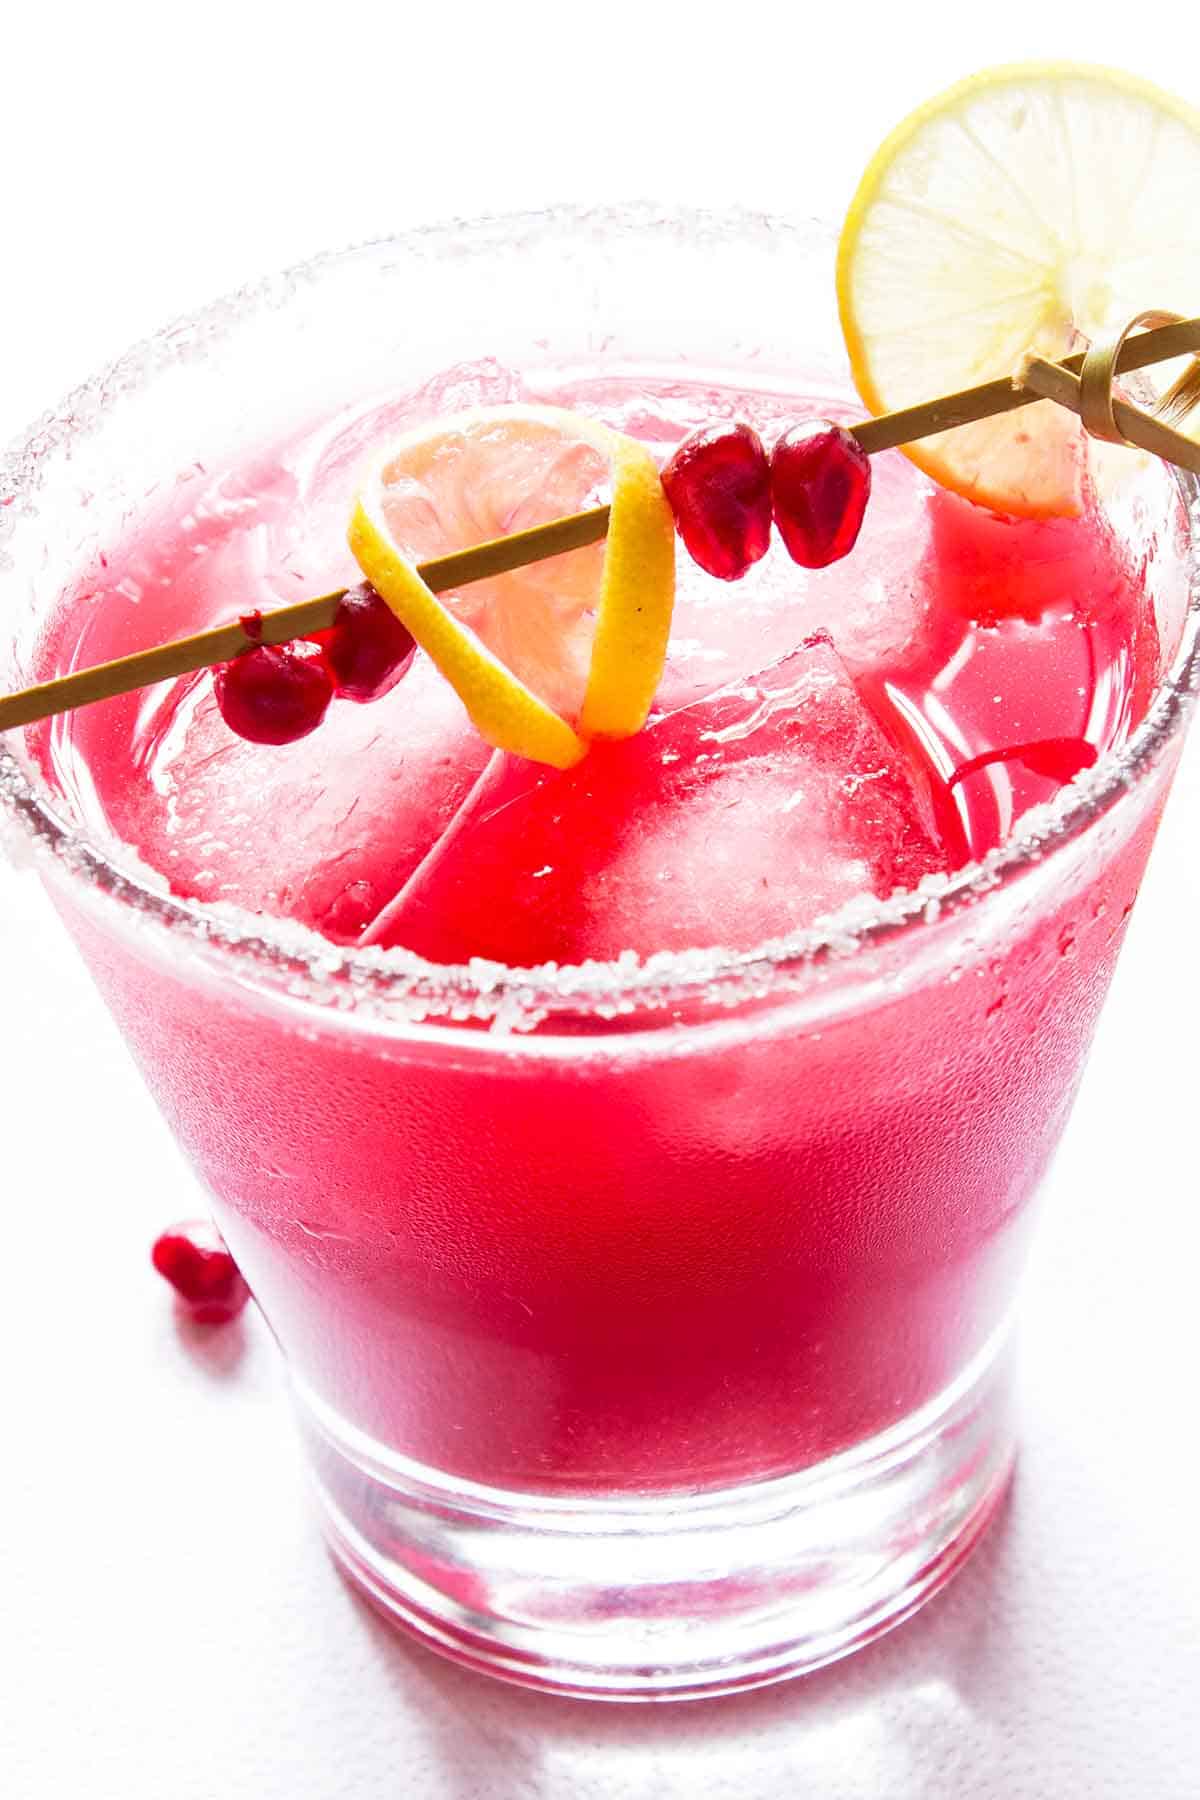 Deep pink pomegranate margarita in glass with lemon slice and stir stick